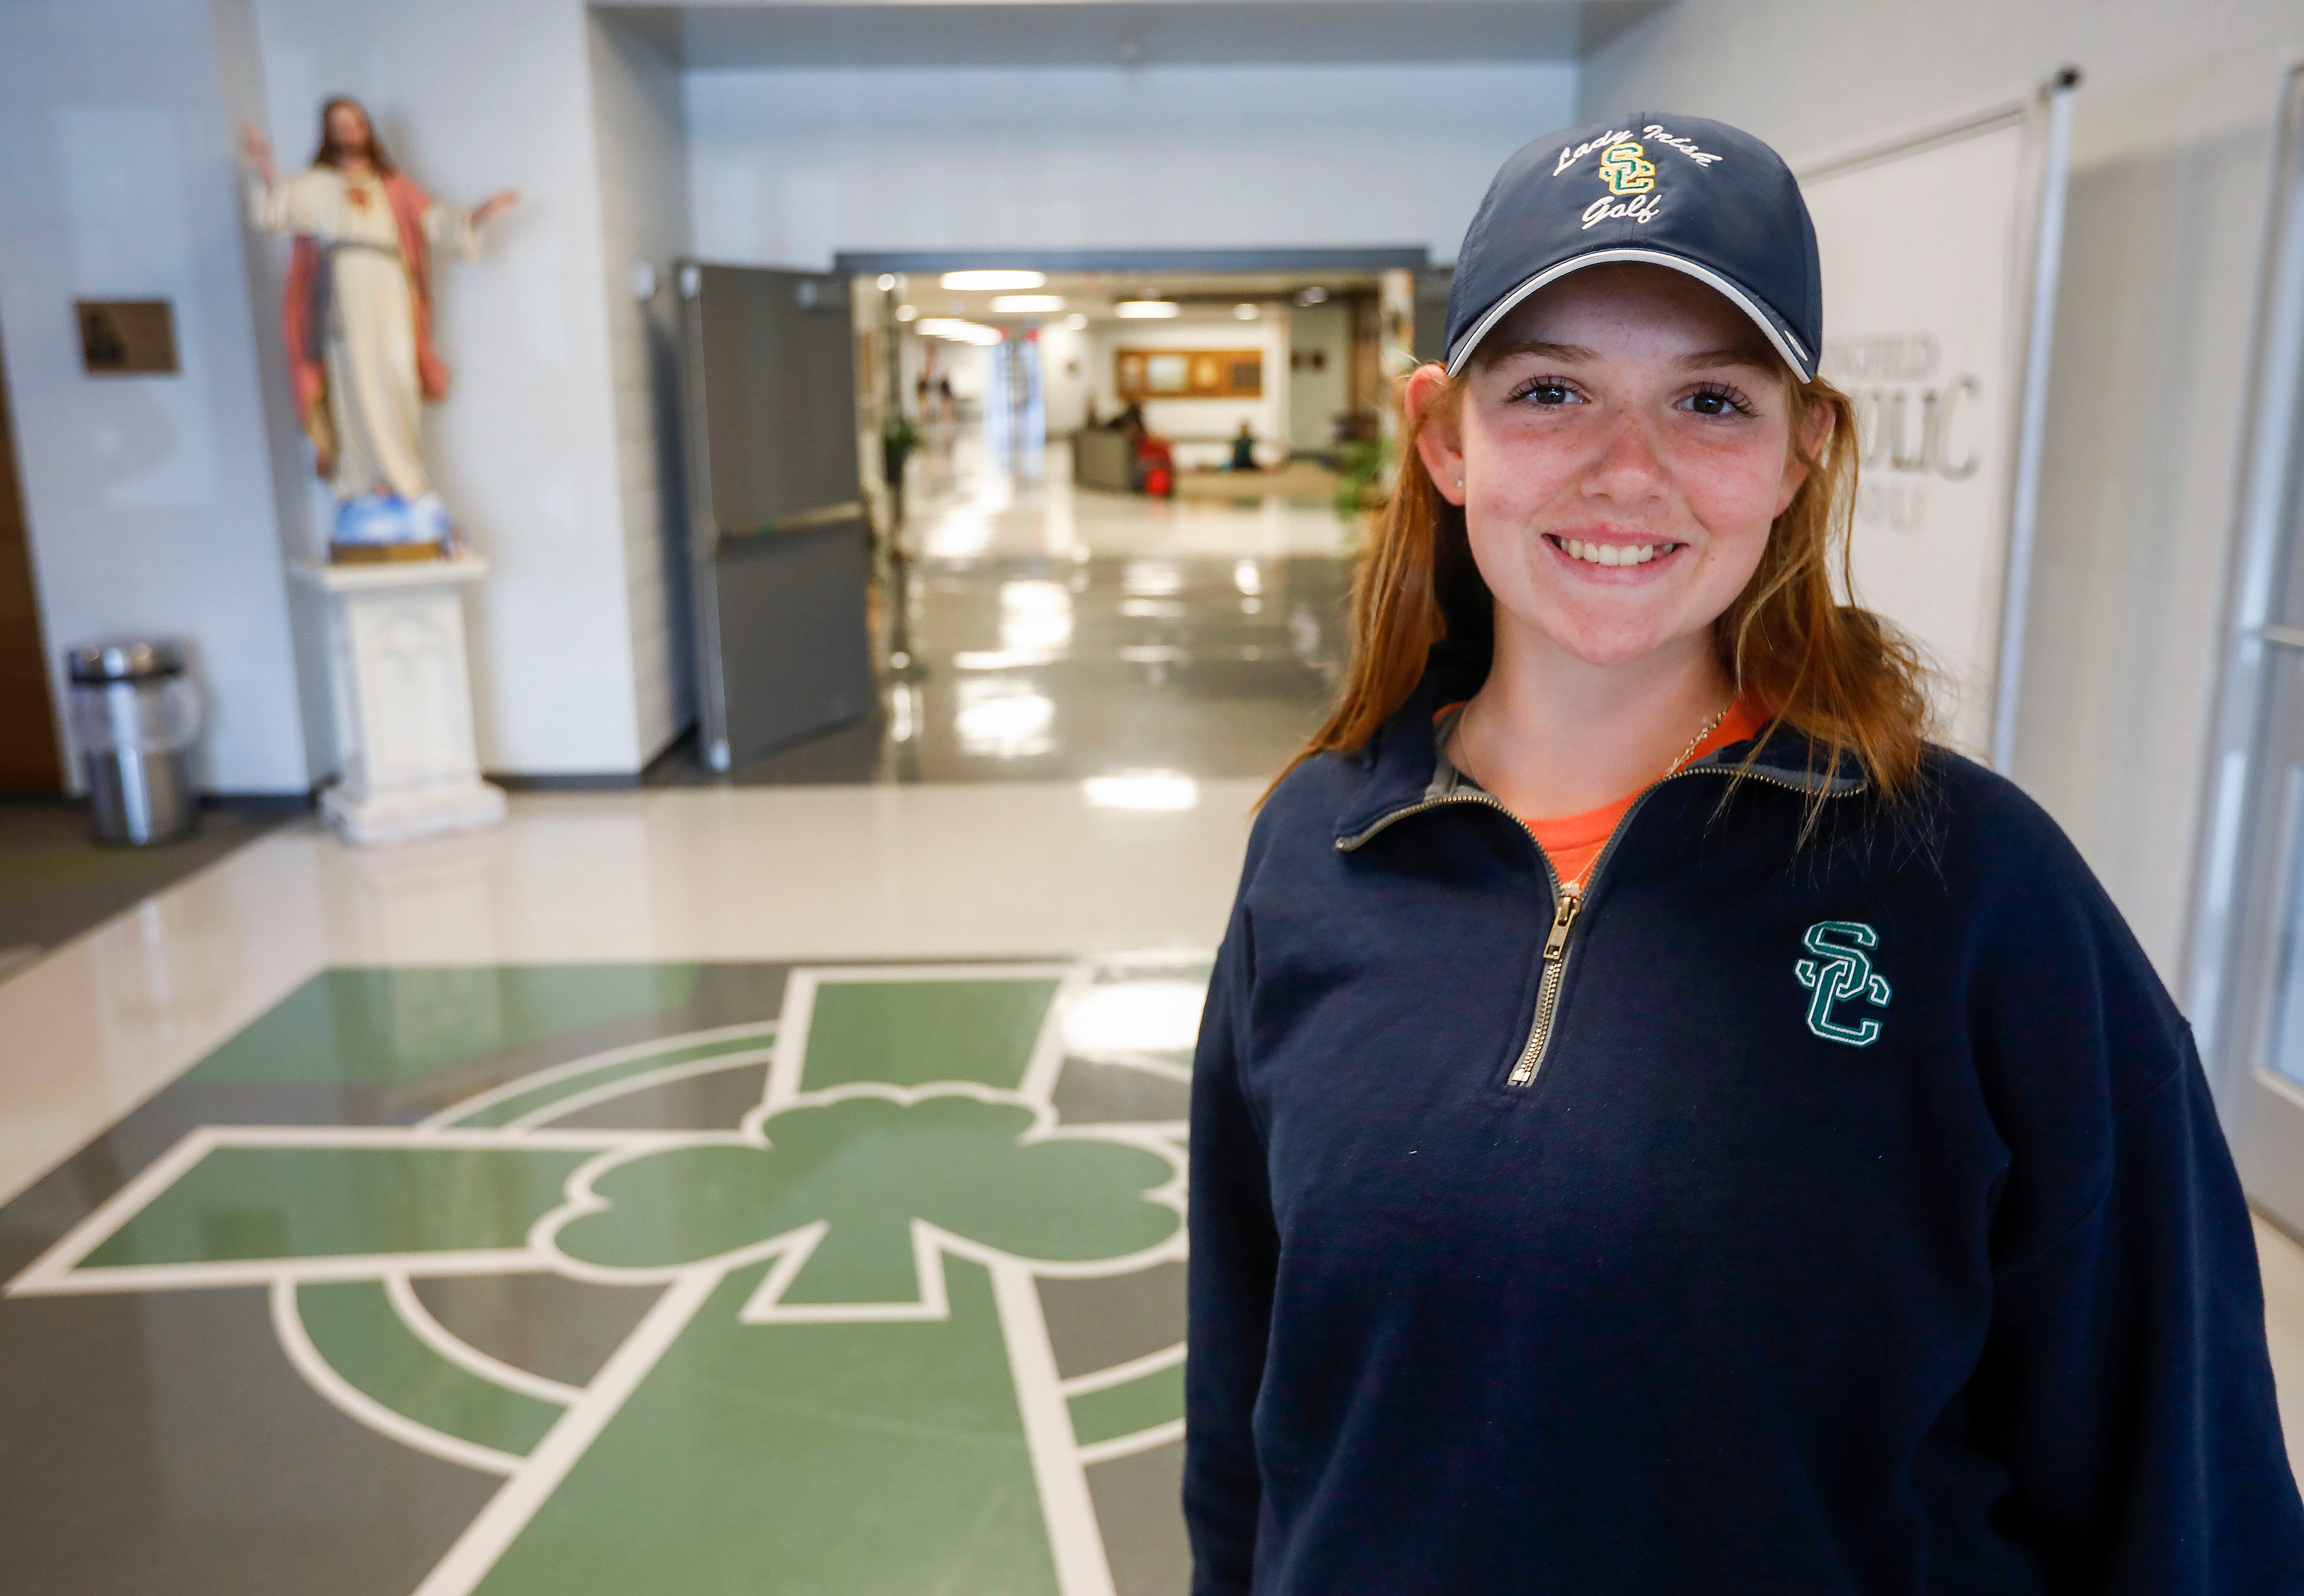 Springfield Catholic's Reagan Zibilski qualified for the U.S. Women's Open back in May 2019.